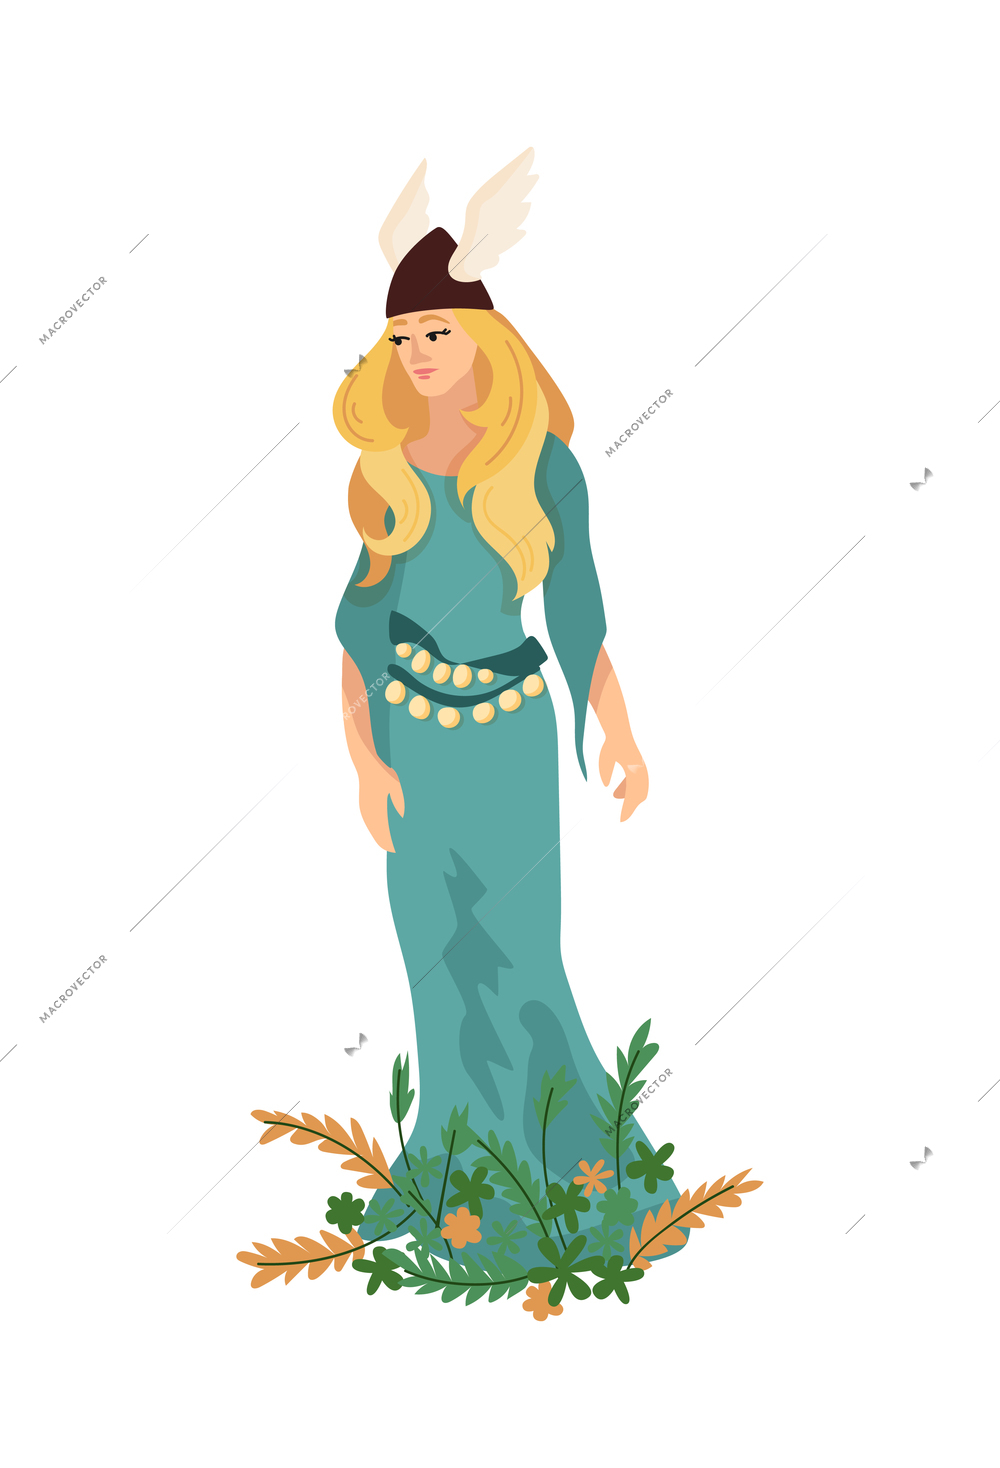 Scandinavian vikings culture composition with isolated character of woman wearing dress and winged hat vector illustration